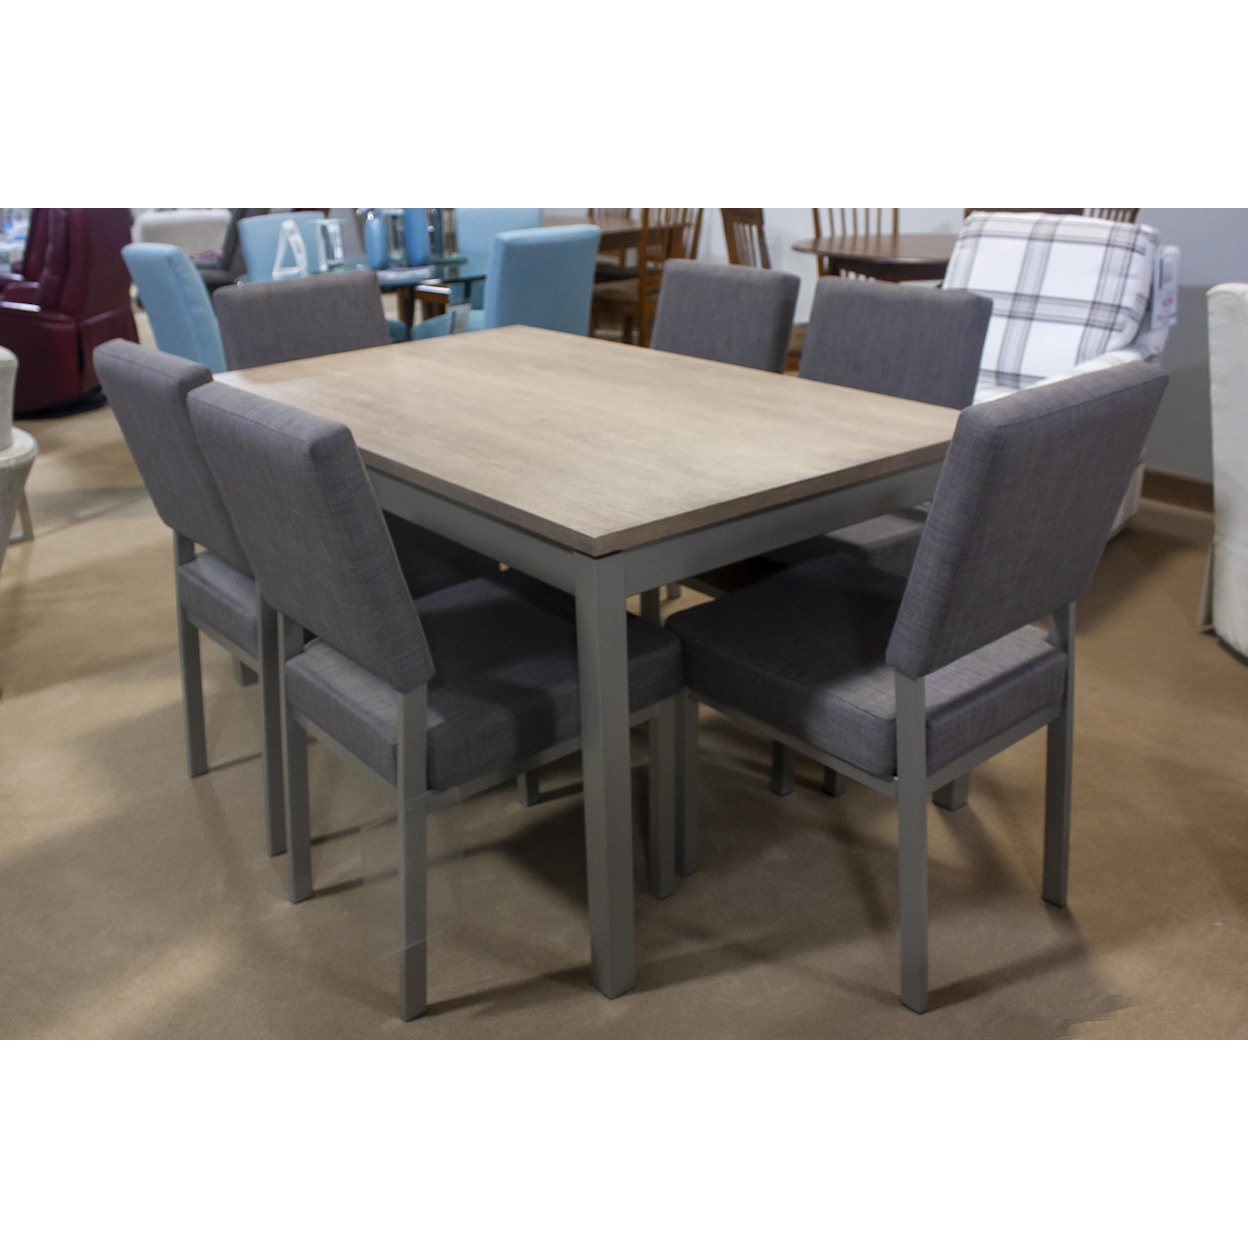 Amisco Zenith Table and 6 Chairs